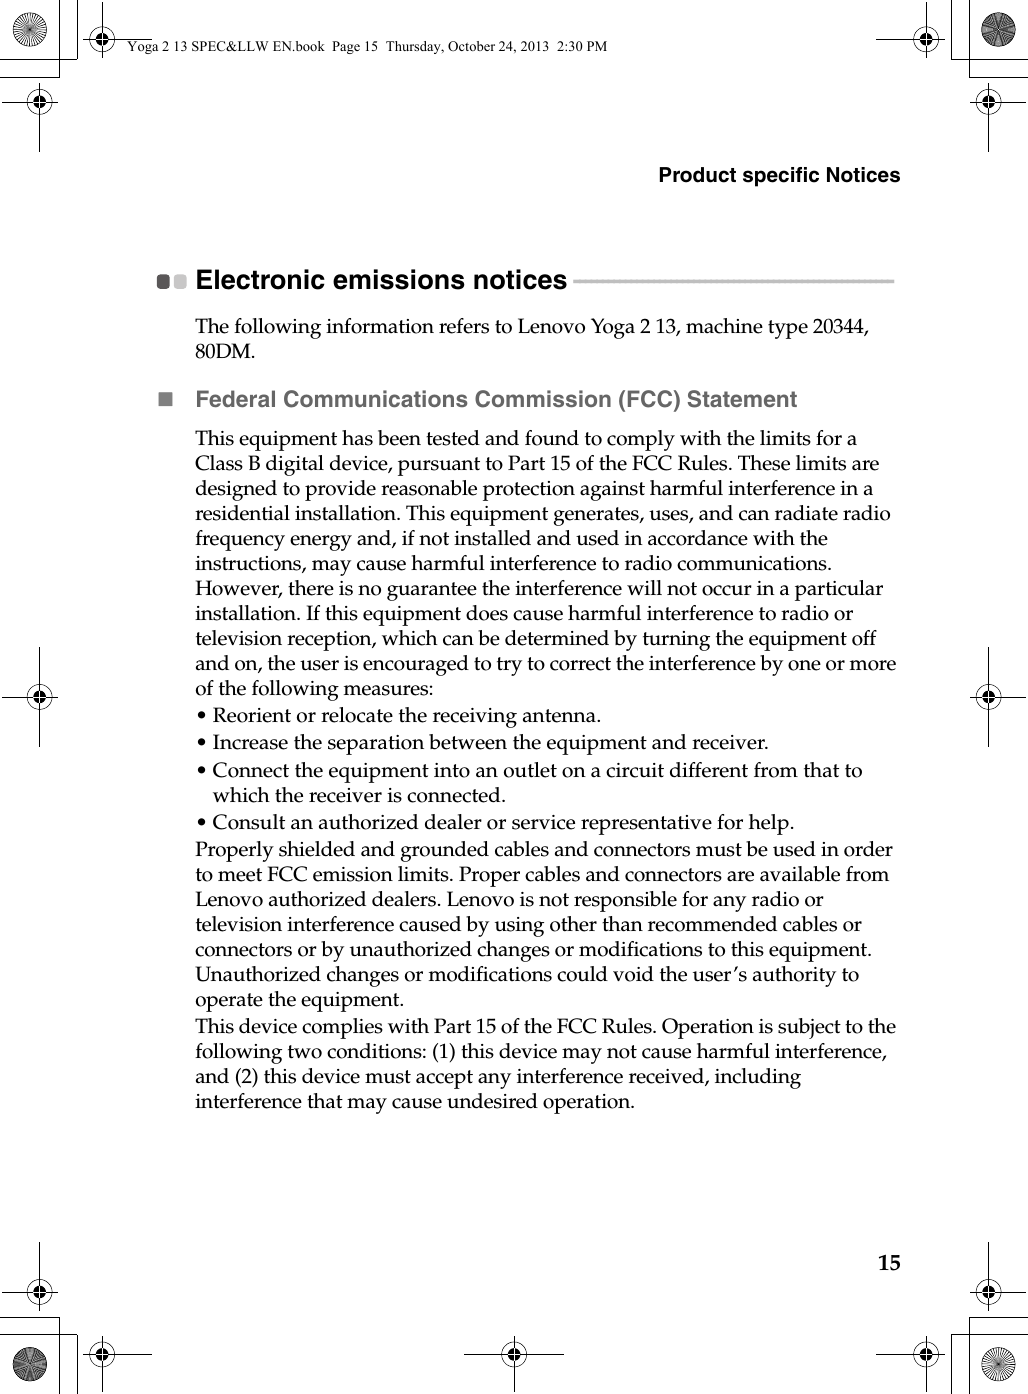 Product specific Notices15Electronic emissions notices  - - - - - - - - - - - - - - - - - - - - - - - - - - - - - - - - - - - - - - - - - - - - - - - - - - - - - - - - The following information refers to Lenovo Yoga 2 13, machine type 20344, 80DM.Federal Communications Commission (FCC) StatementThis equipment has been tested and found to comply with the limits for a Class B digital device, pursuant to Part 15 of the FCC Rules. These limits are designed to provide reasonable protection against harmful interference in a residential installation. This equipment generates, uses, and can radiate radio frequency energy and, if not installed and used in accordance with the instructions, may cause harmful interference to radio communications. However, there is no guarantee the interference will not occur in a particular installation. If this equipment does cause harmful interference to radio or television reception, which can be determined by turning the equipment off and on, the user is encouraged to try to correct the interference by one or more of the following measures:• Reorient or relocate the receiving antenna.• Increase the separation between the equipment and receiver.• Connect the equipment into an outlet on a circuit different from that to which the receiver is connected.• Consult an authorized dealer or service representative for help.Properly shielded and grounded cables and connectors must be used in order to meet FCC emission limits. Proper cables and connectors are available from Lenovo authorized dealers. Lenovo is not responsible for any radio or television interference caused by using other than recommended cables or connectors or by unauthorized changes or modifications to this equipment. Unauthorized changes or modifications could void the user’s authority to operate the equipment.This device complies with Part 15 of the FCC Rules. Operation is subject to the following two conditions: (1) this device may not cause harmful interference, and (2) this device must accept any interference received, including interference that may cause undesired operation.Yoga 2 13 SPEC&amp;LLW EN.book  Page 15  Thursday, October 24, 2013  2:30 PM